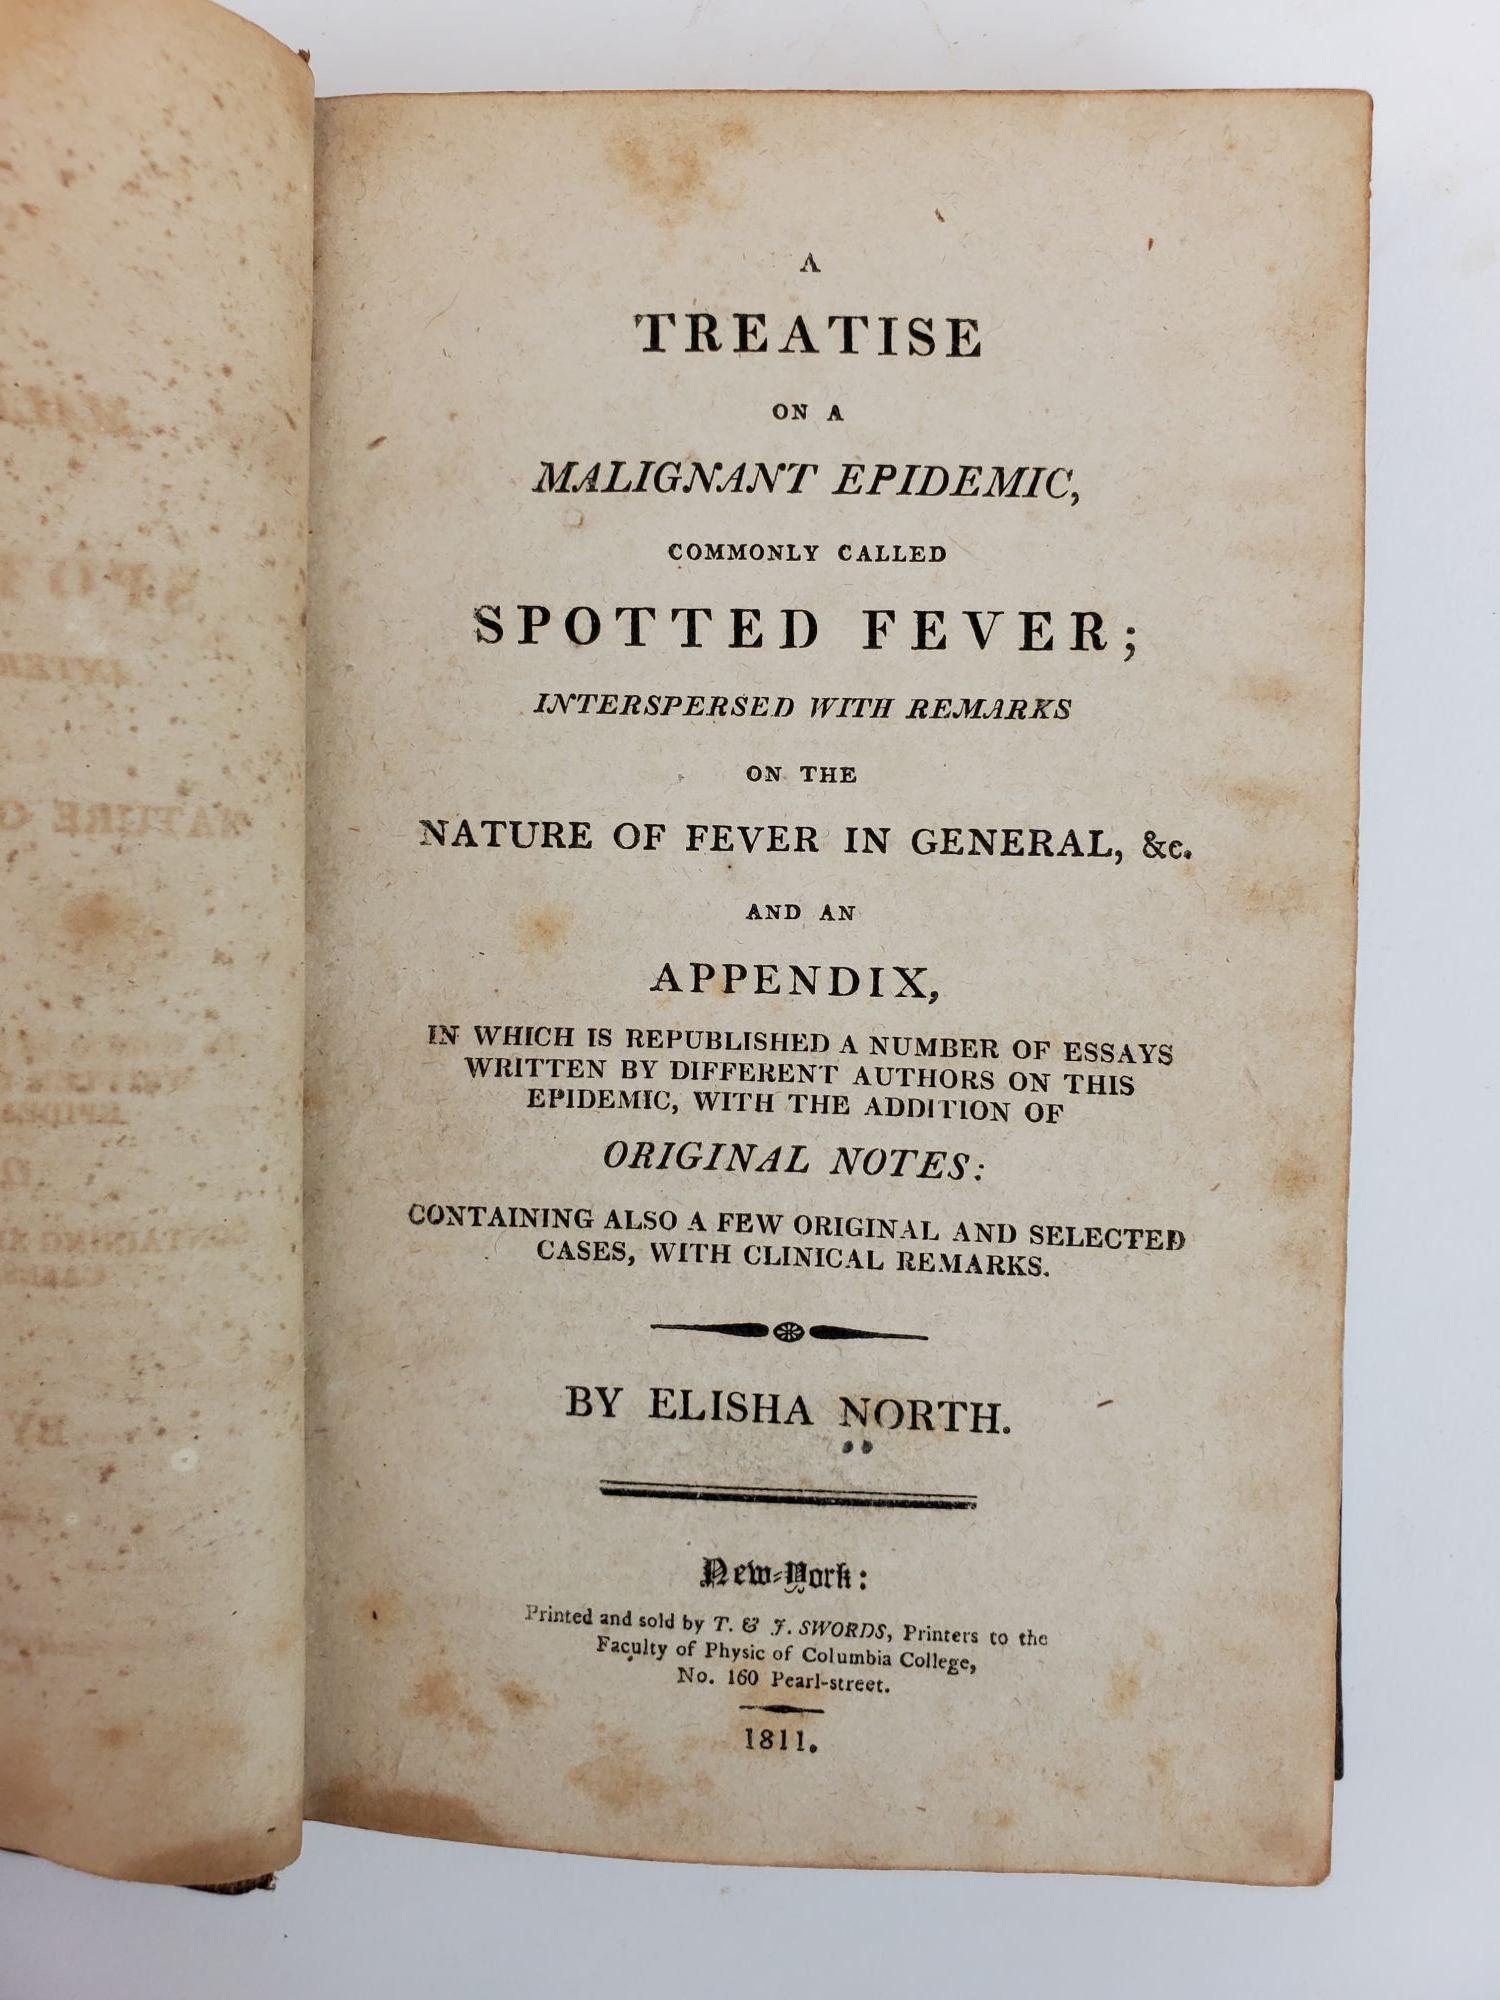 Product Image for A TREATISE ON A MALIGNANT EPIDEMIC, COMMONLY CALLED SPOTTED FEVER; INTERSPERSED WITH REMARKS ON THE NATURE OF FEVER IN GENERAL, &C. AND AN APPENDIX, IN WHICH IS REPUBLISHED A NUMBER OF ESSAYS WRITTEN BY DIFFERENT AUTHORS ON THIS EPIDEMIC, WITH THE ADDITIO